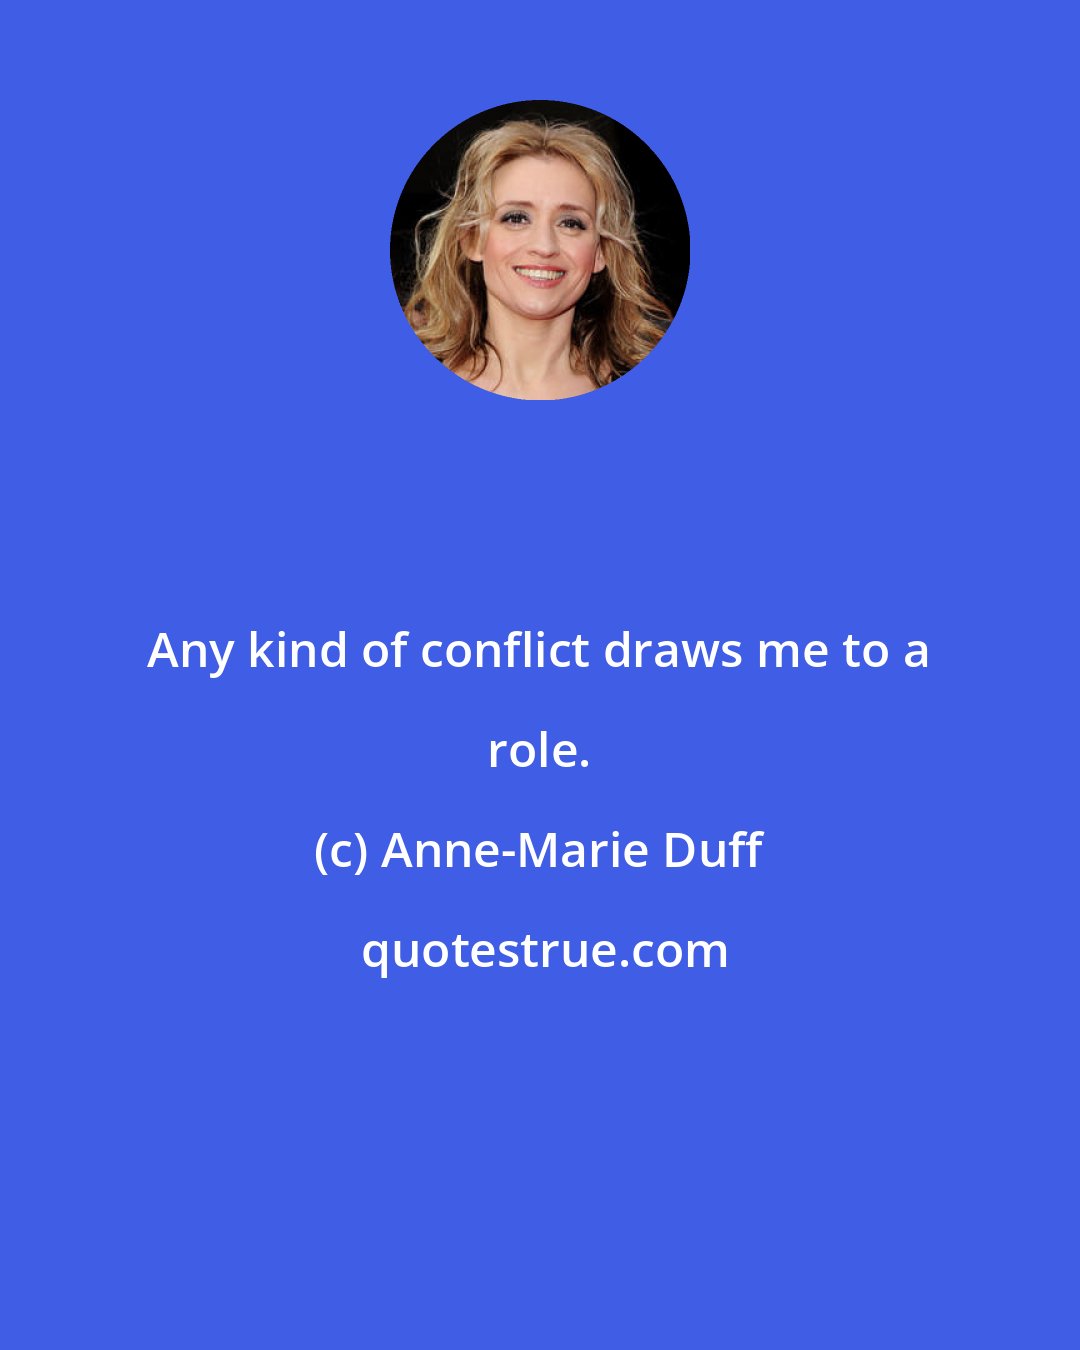 Anne-Marie Duff: Any kind of conflict draws me to a role.